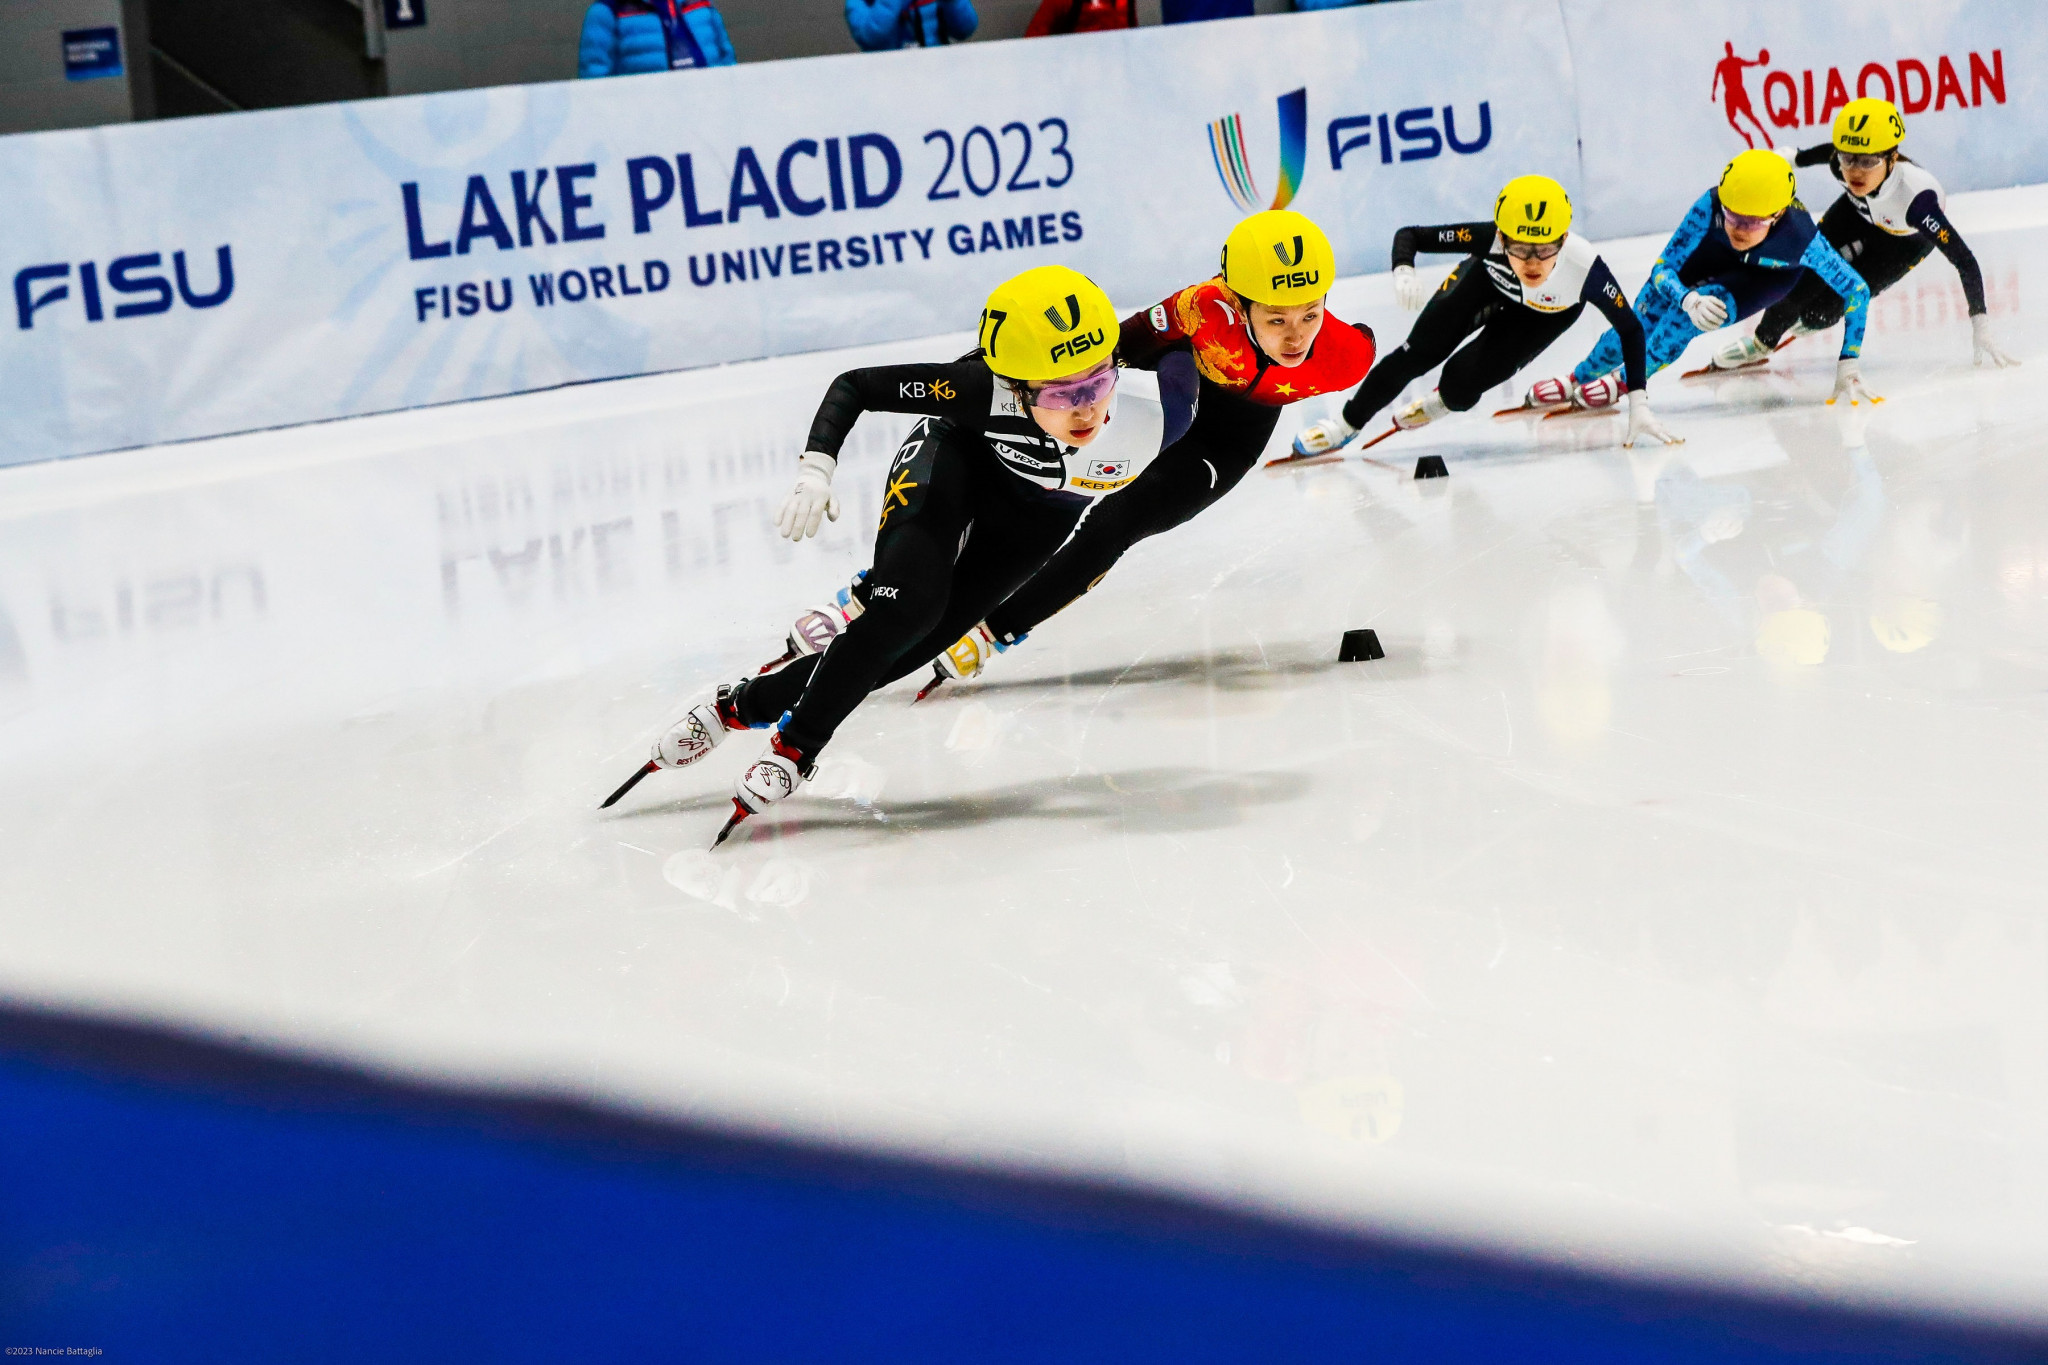 A lot of importance was given to sustainability during the Lake Placid 2023 Winter World University Games in January this year ©FISU 